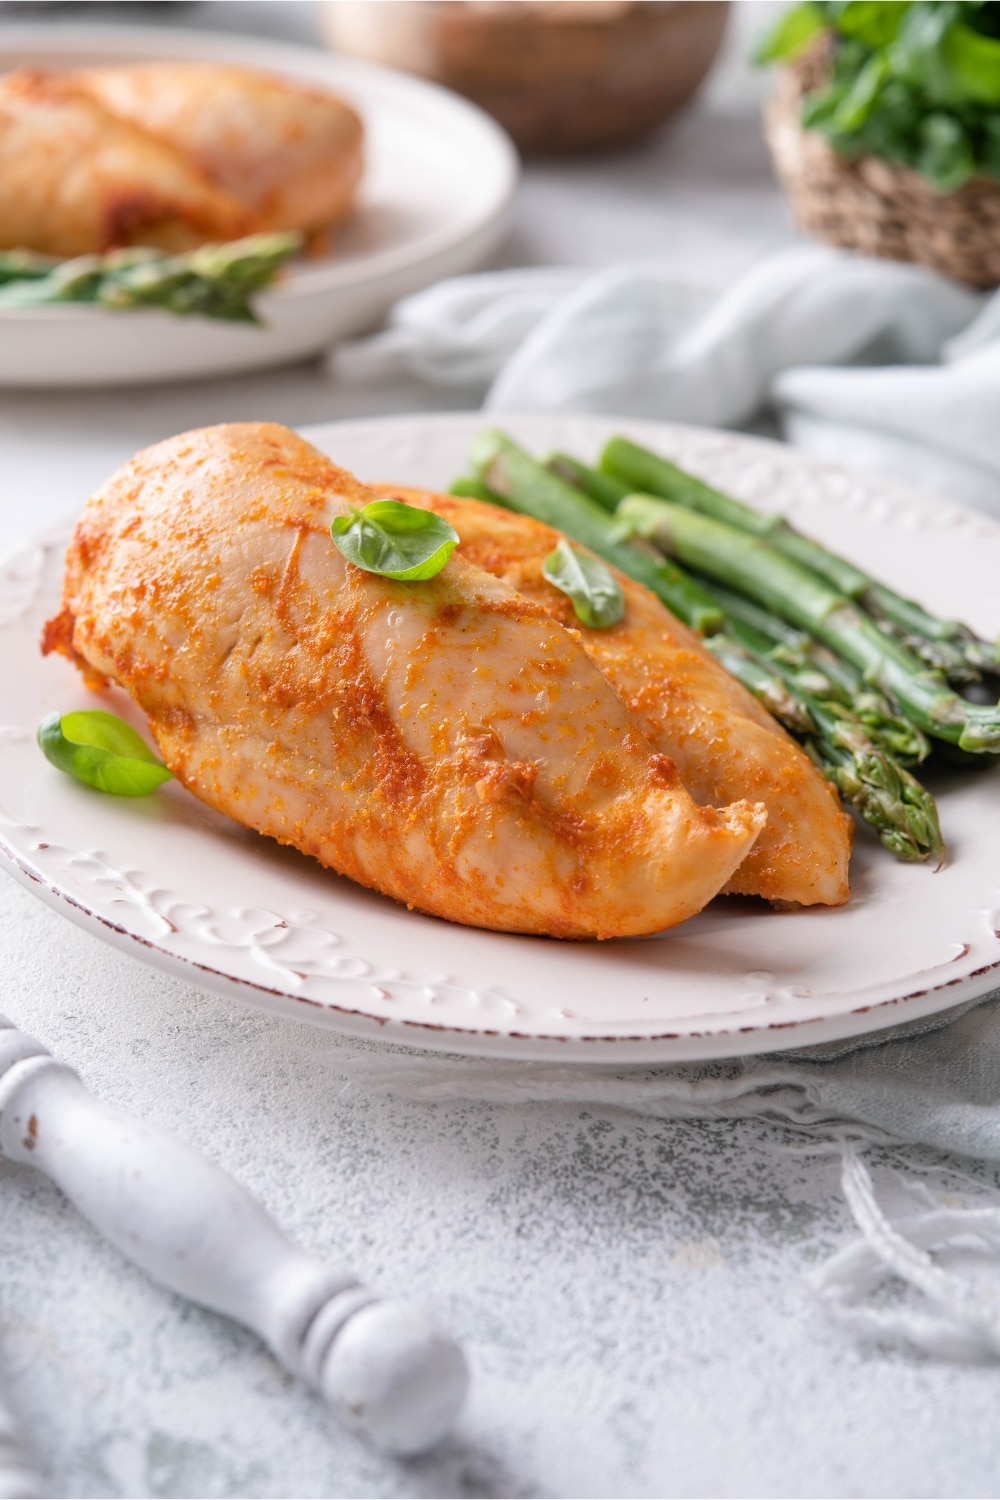 Seasoned baked chicken breasts served with asparagus and garnished with basil leaves on a plate.